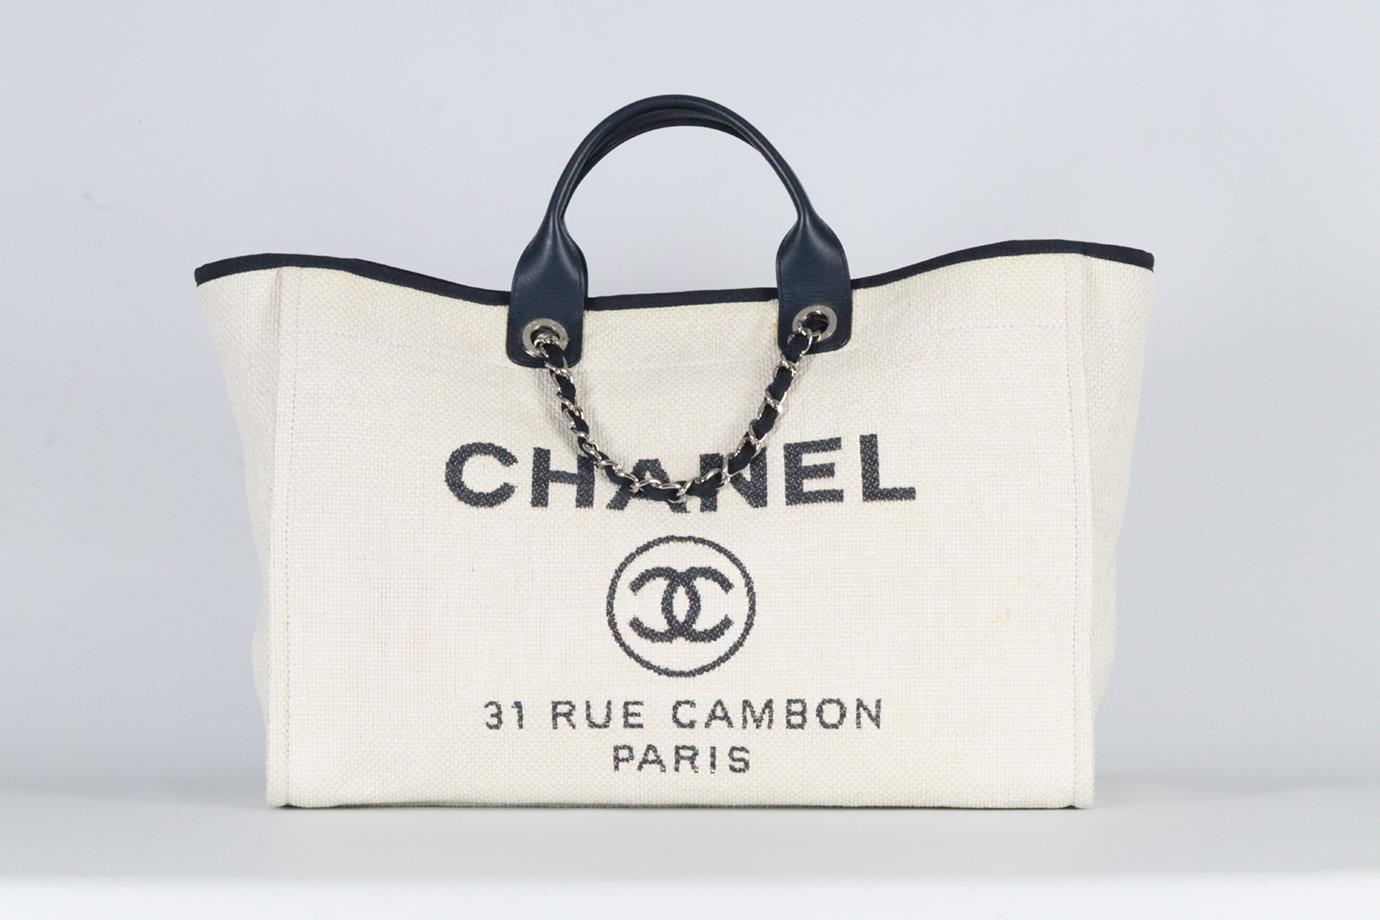 CHANEL 2017 DEAUVILLE LARGE CANVAS AND LEATHER TOTE BAG